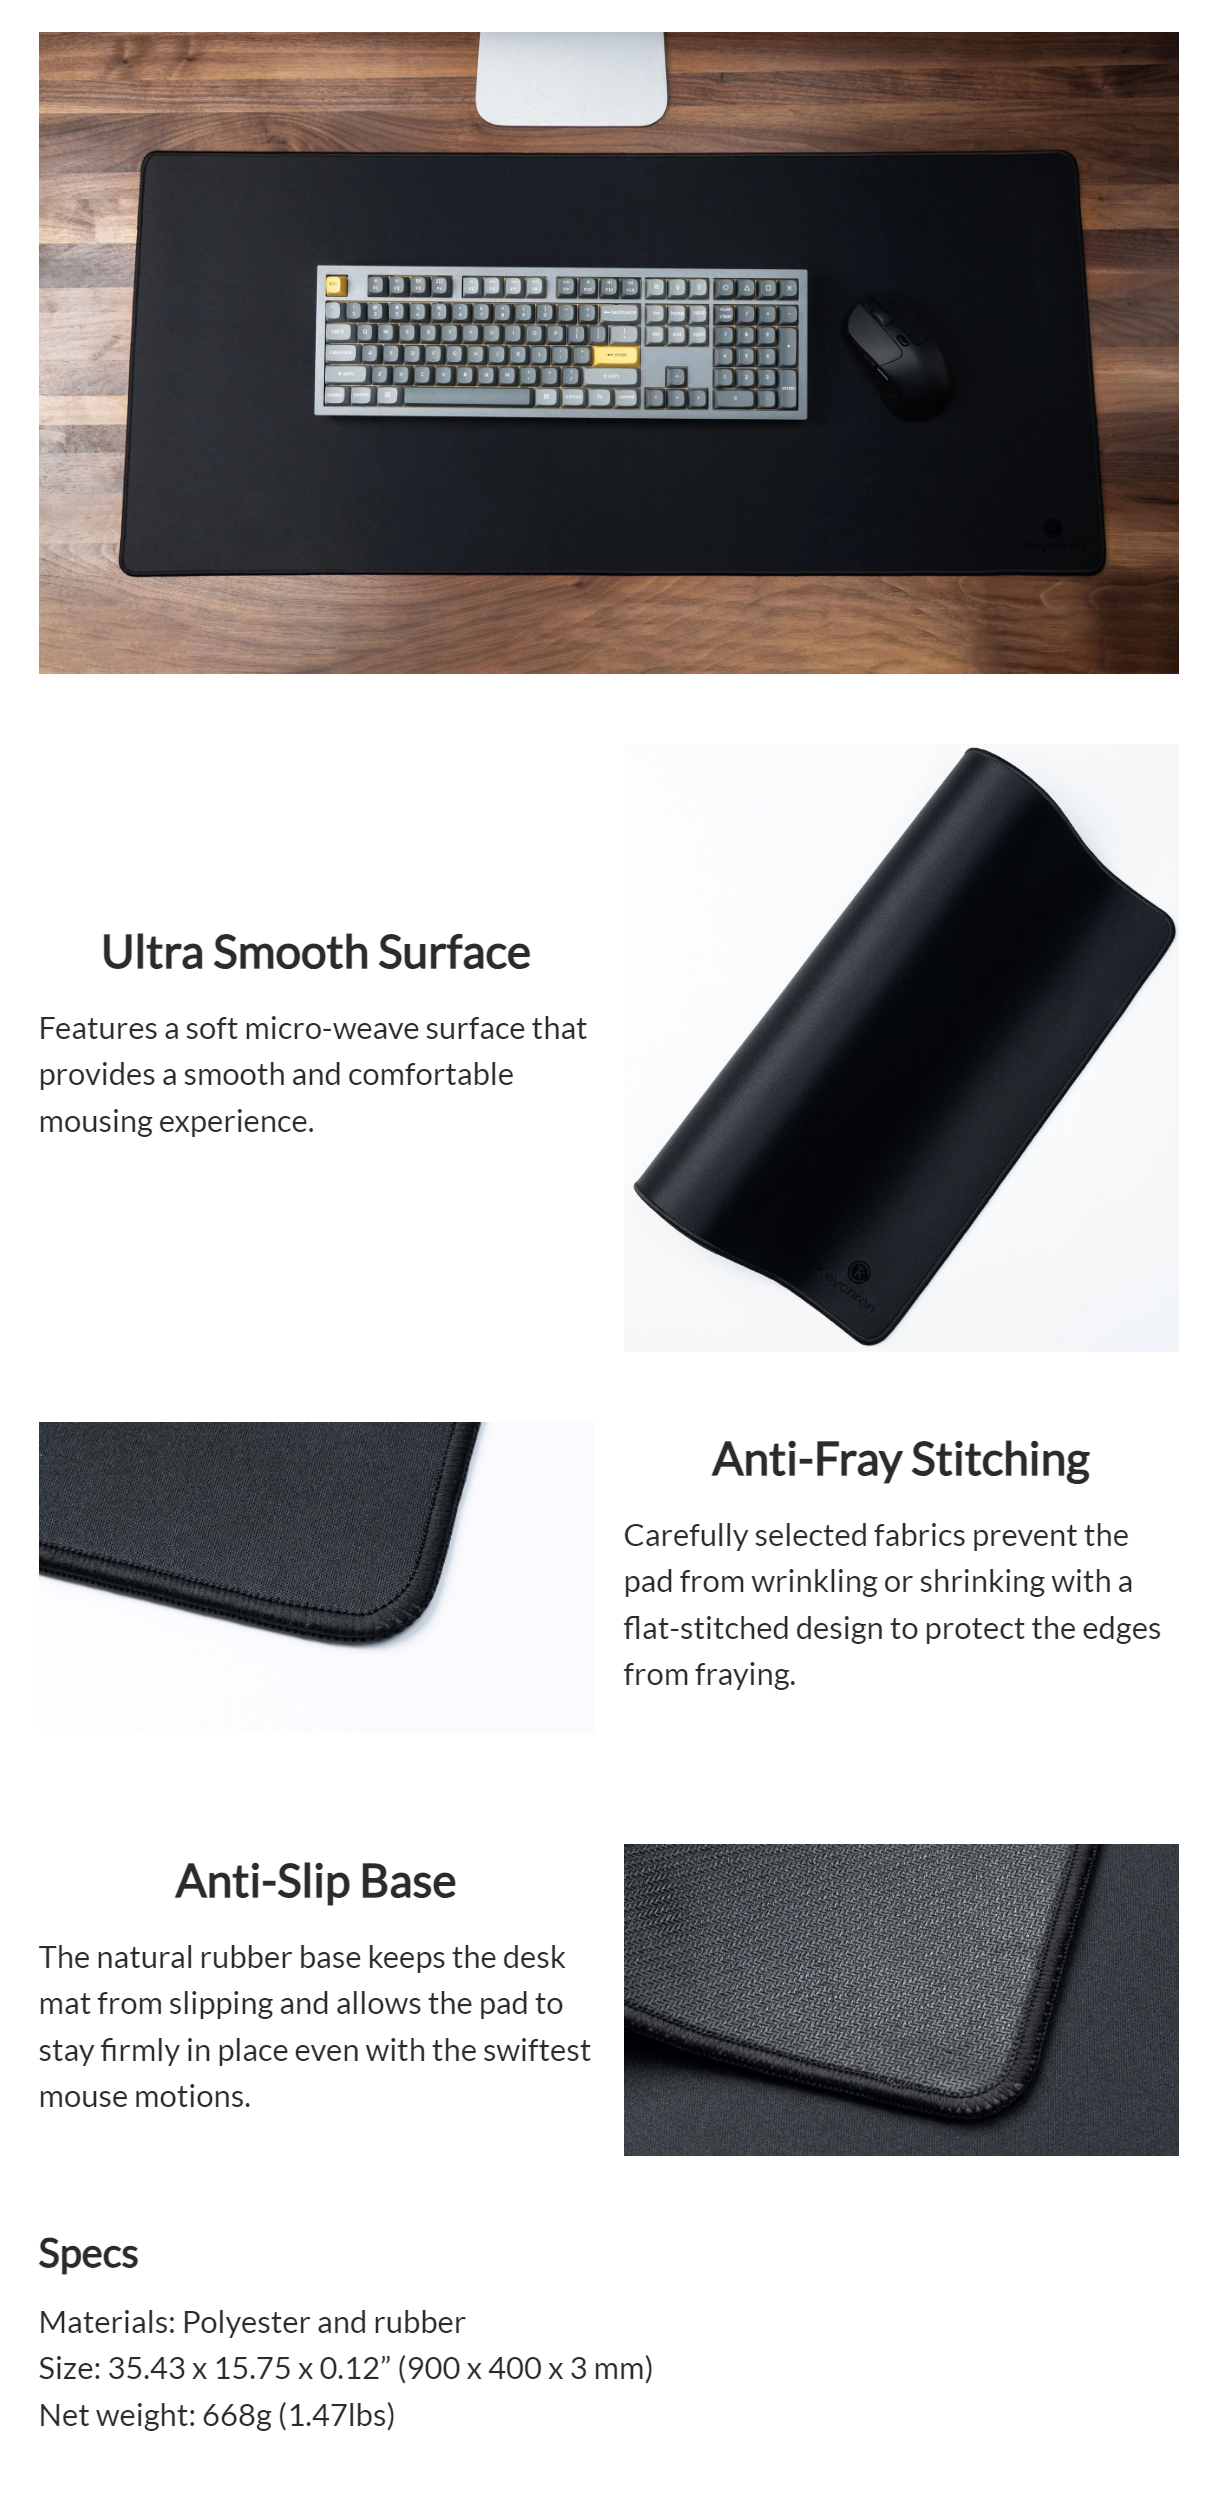 A large marketing image providing additional information about the product Keychron Polyester Mouse Pad - Black - Additional alt info not provided